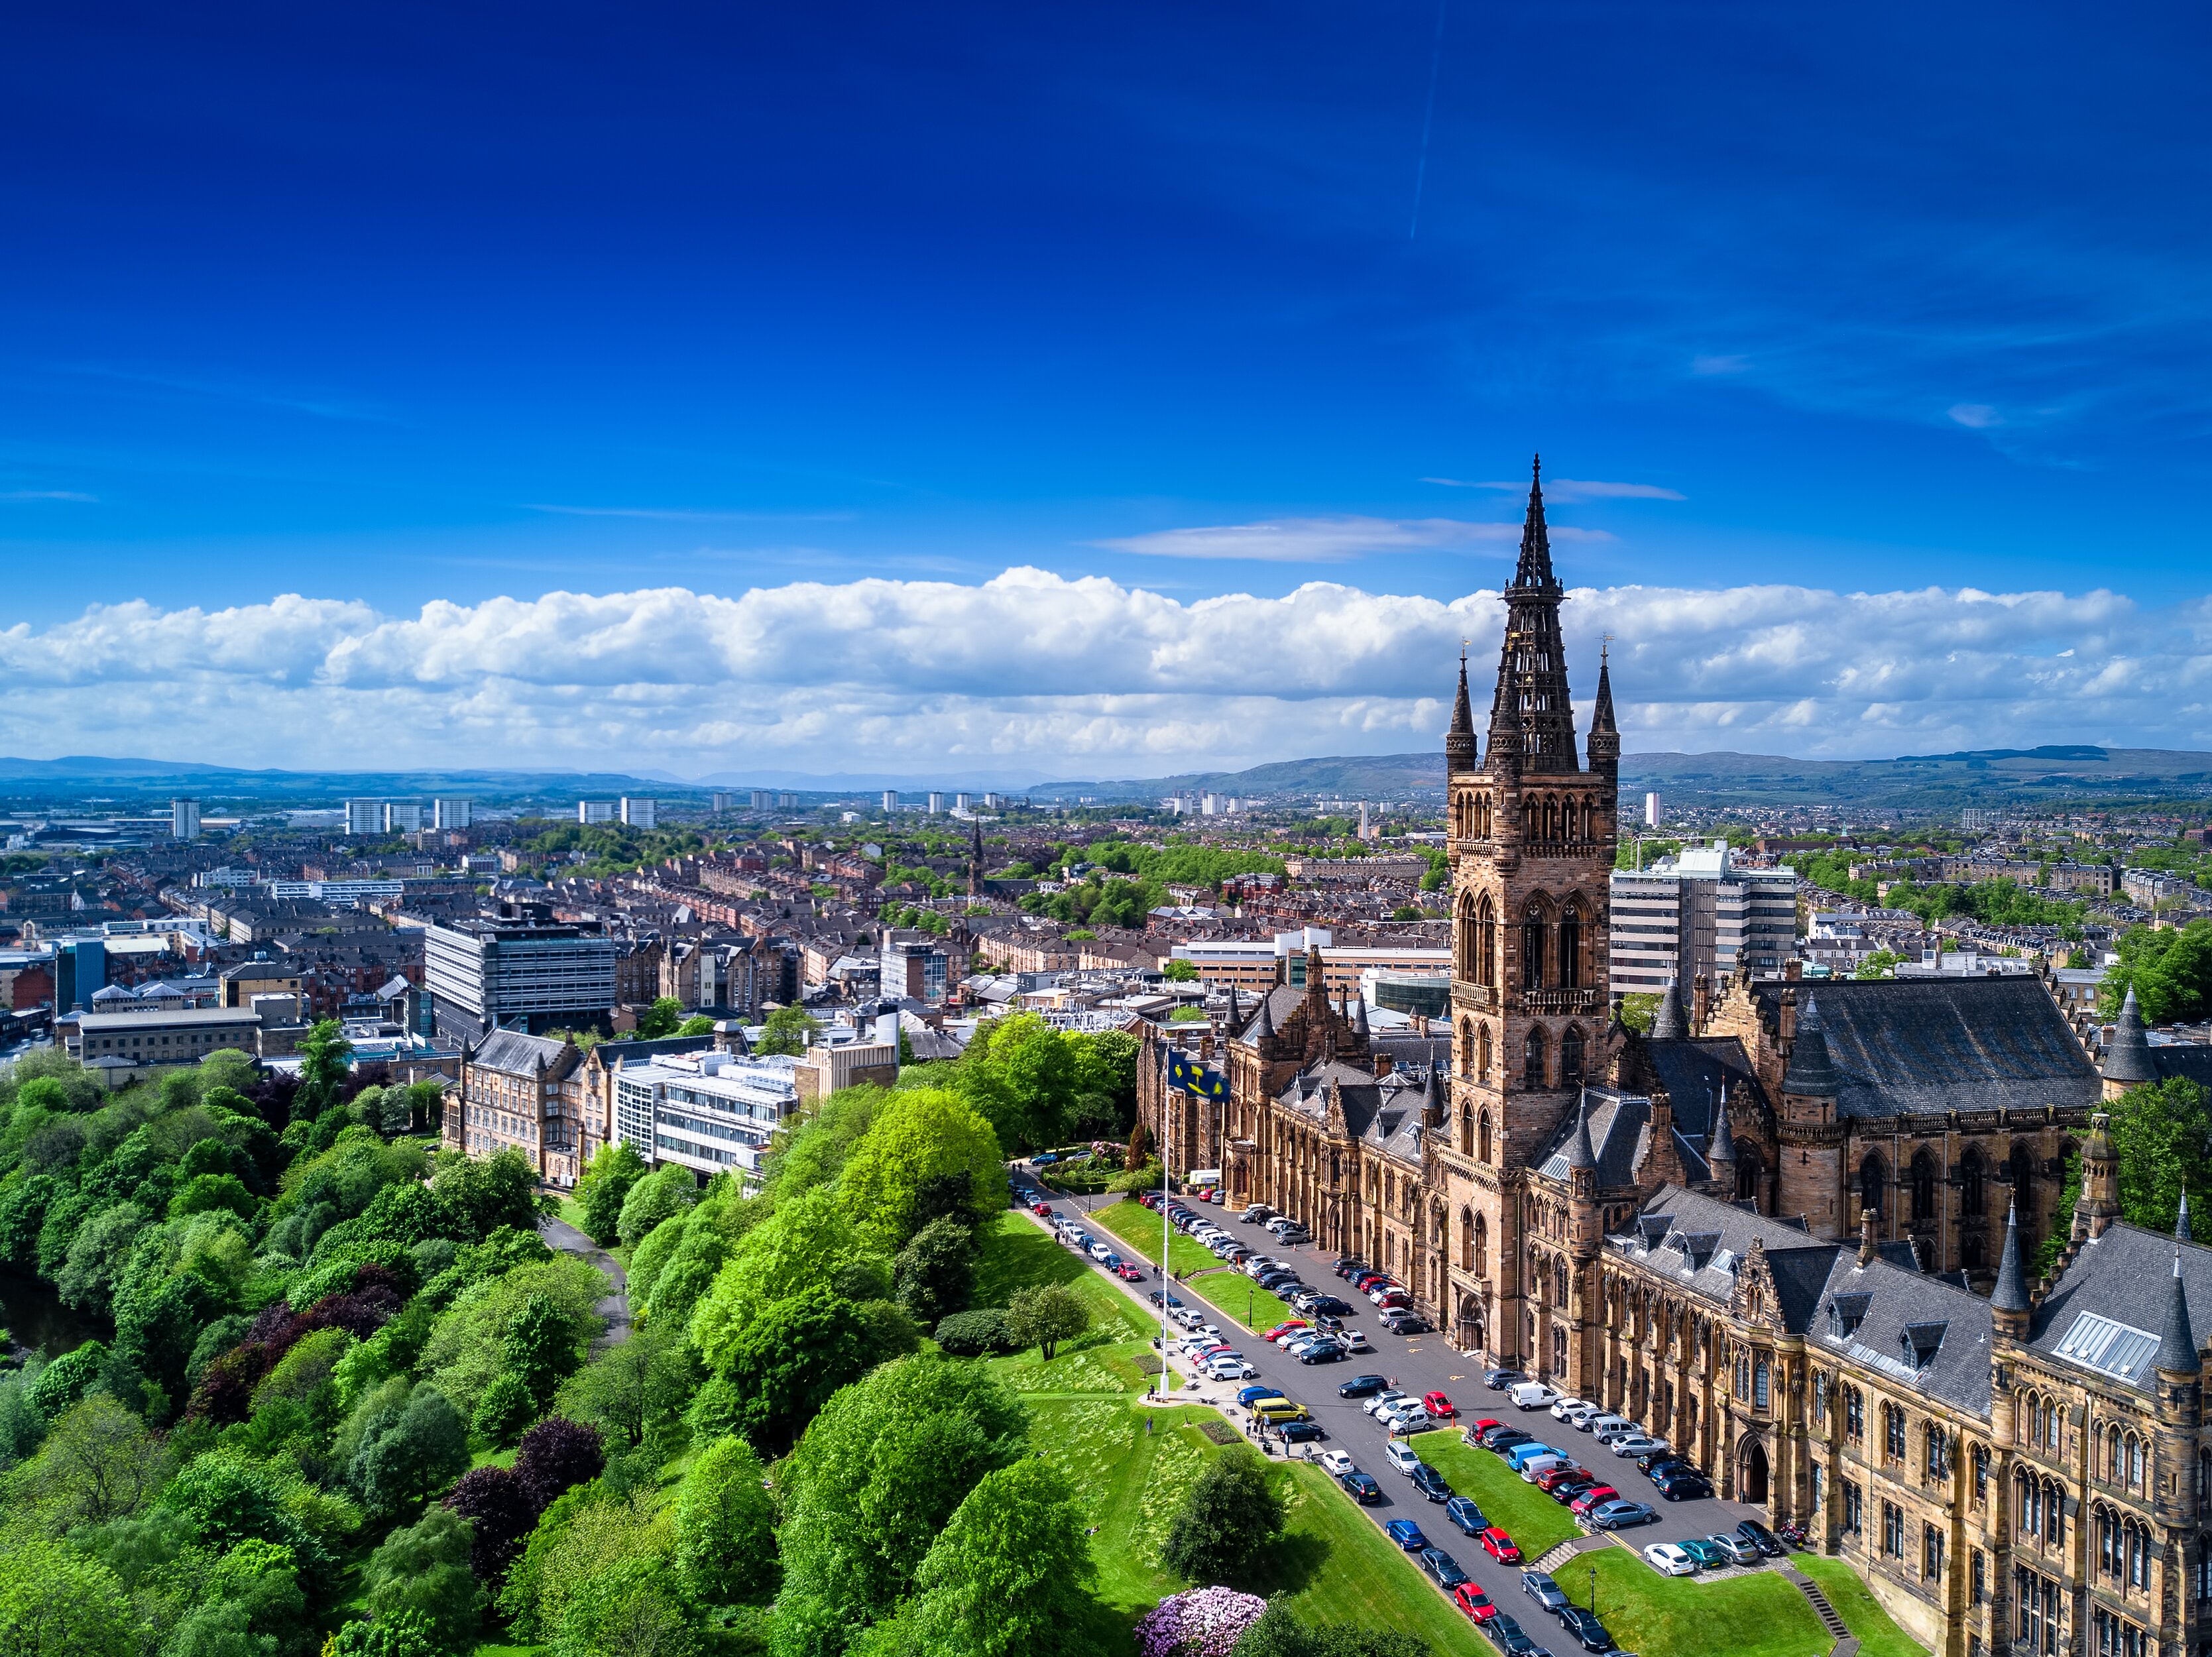 Glasgow hotel occupancy nearing 90% for climate change conference